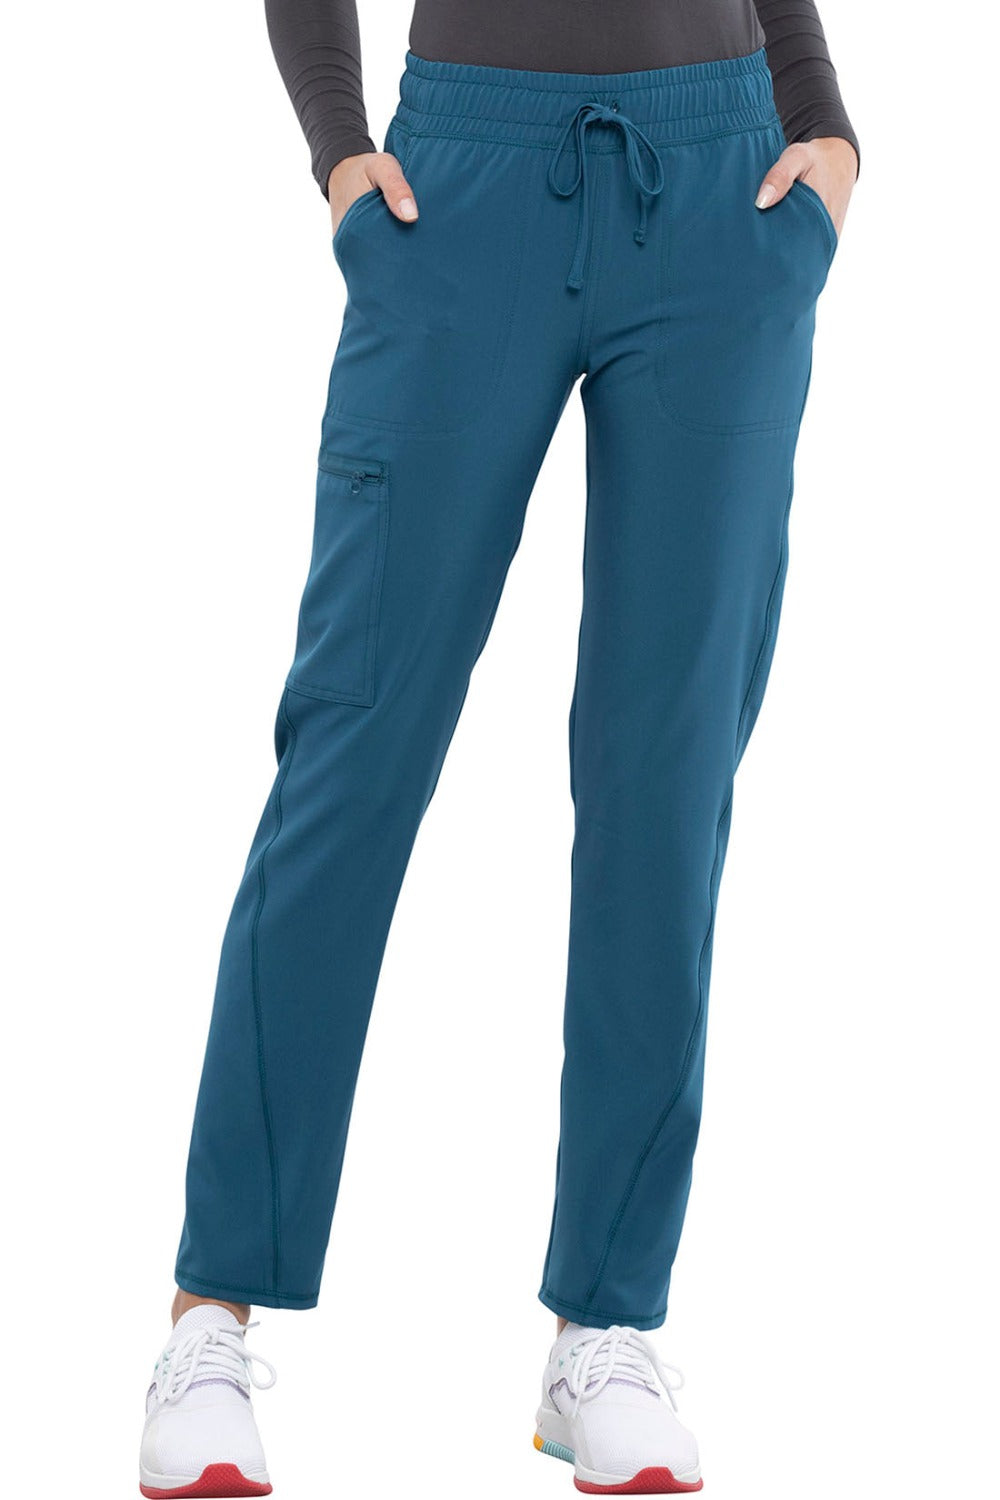 Cherokee Allura Tall Scrub Pant Mid Rise Tapered Leg Drawstring in Caribbean at Parker's Clothing and Shoes.